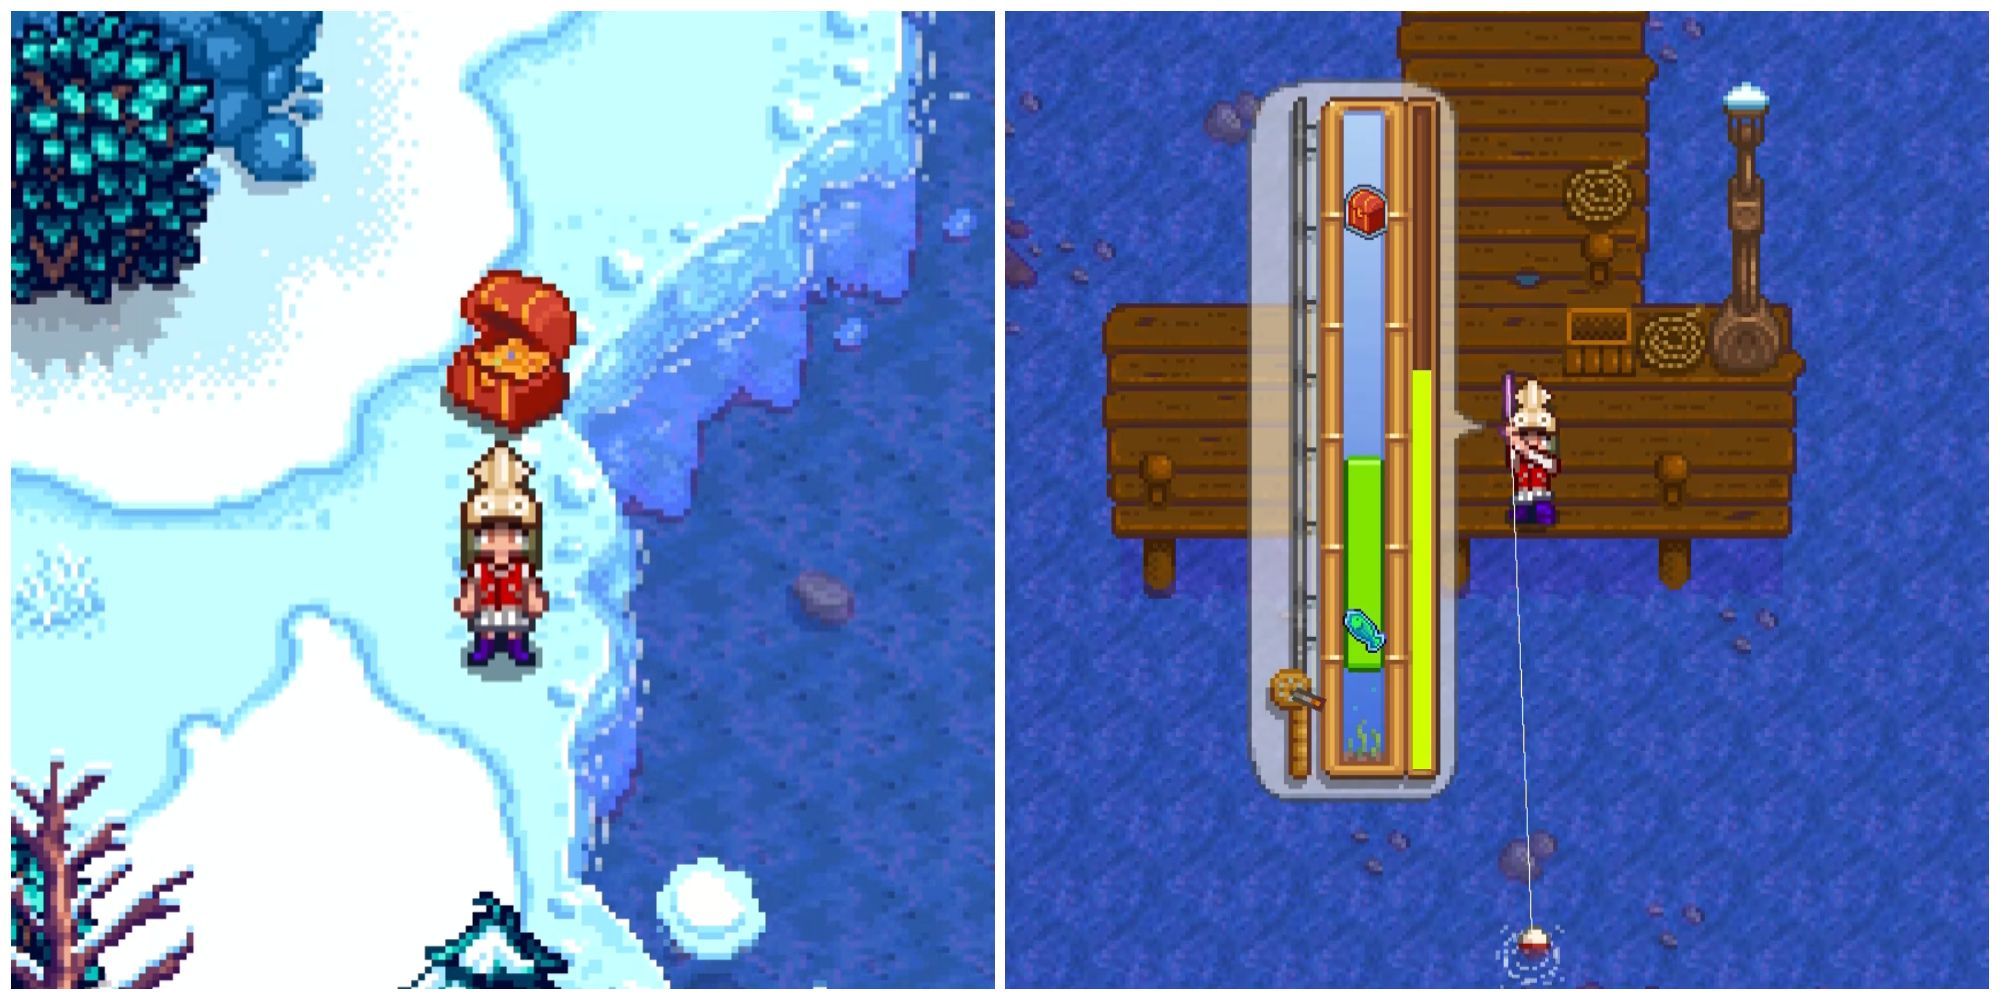 Split image of a character opening up a treasure chest and a character fishing for a treasure chest in the ocean in Stardew Valley